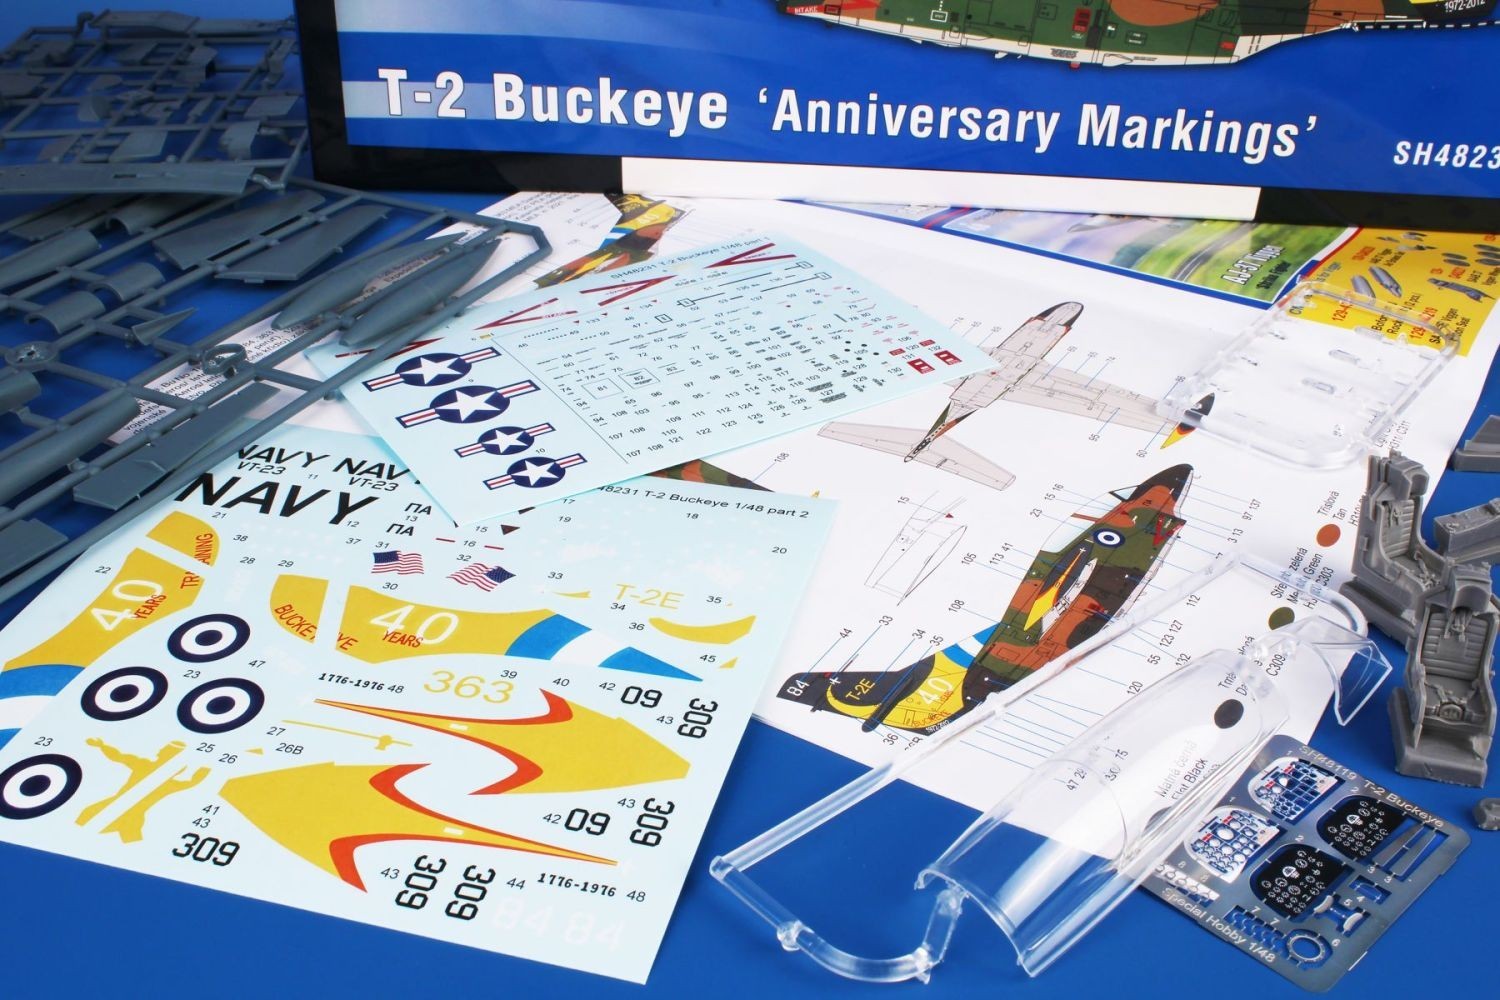 Special Hobby Re-Releases 1/48 T-2 Buckeye with Spectacular Anniversary Markings Decals